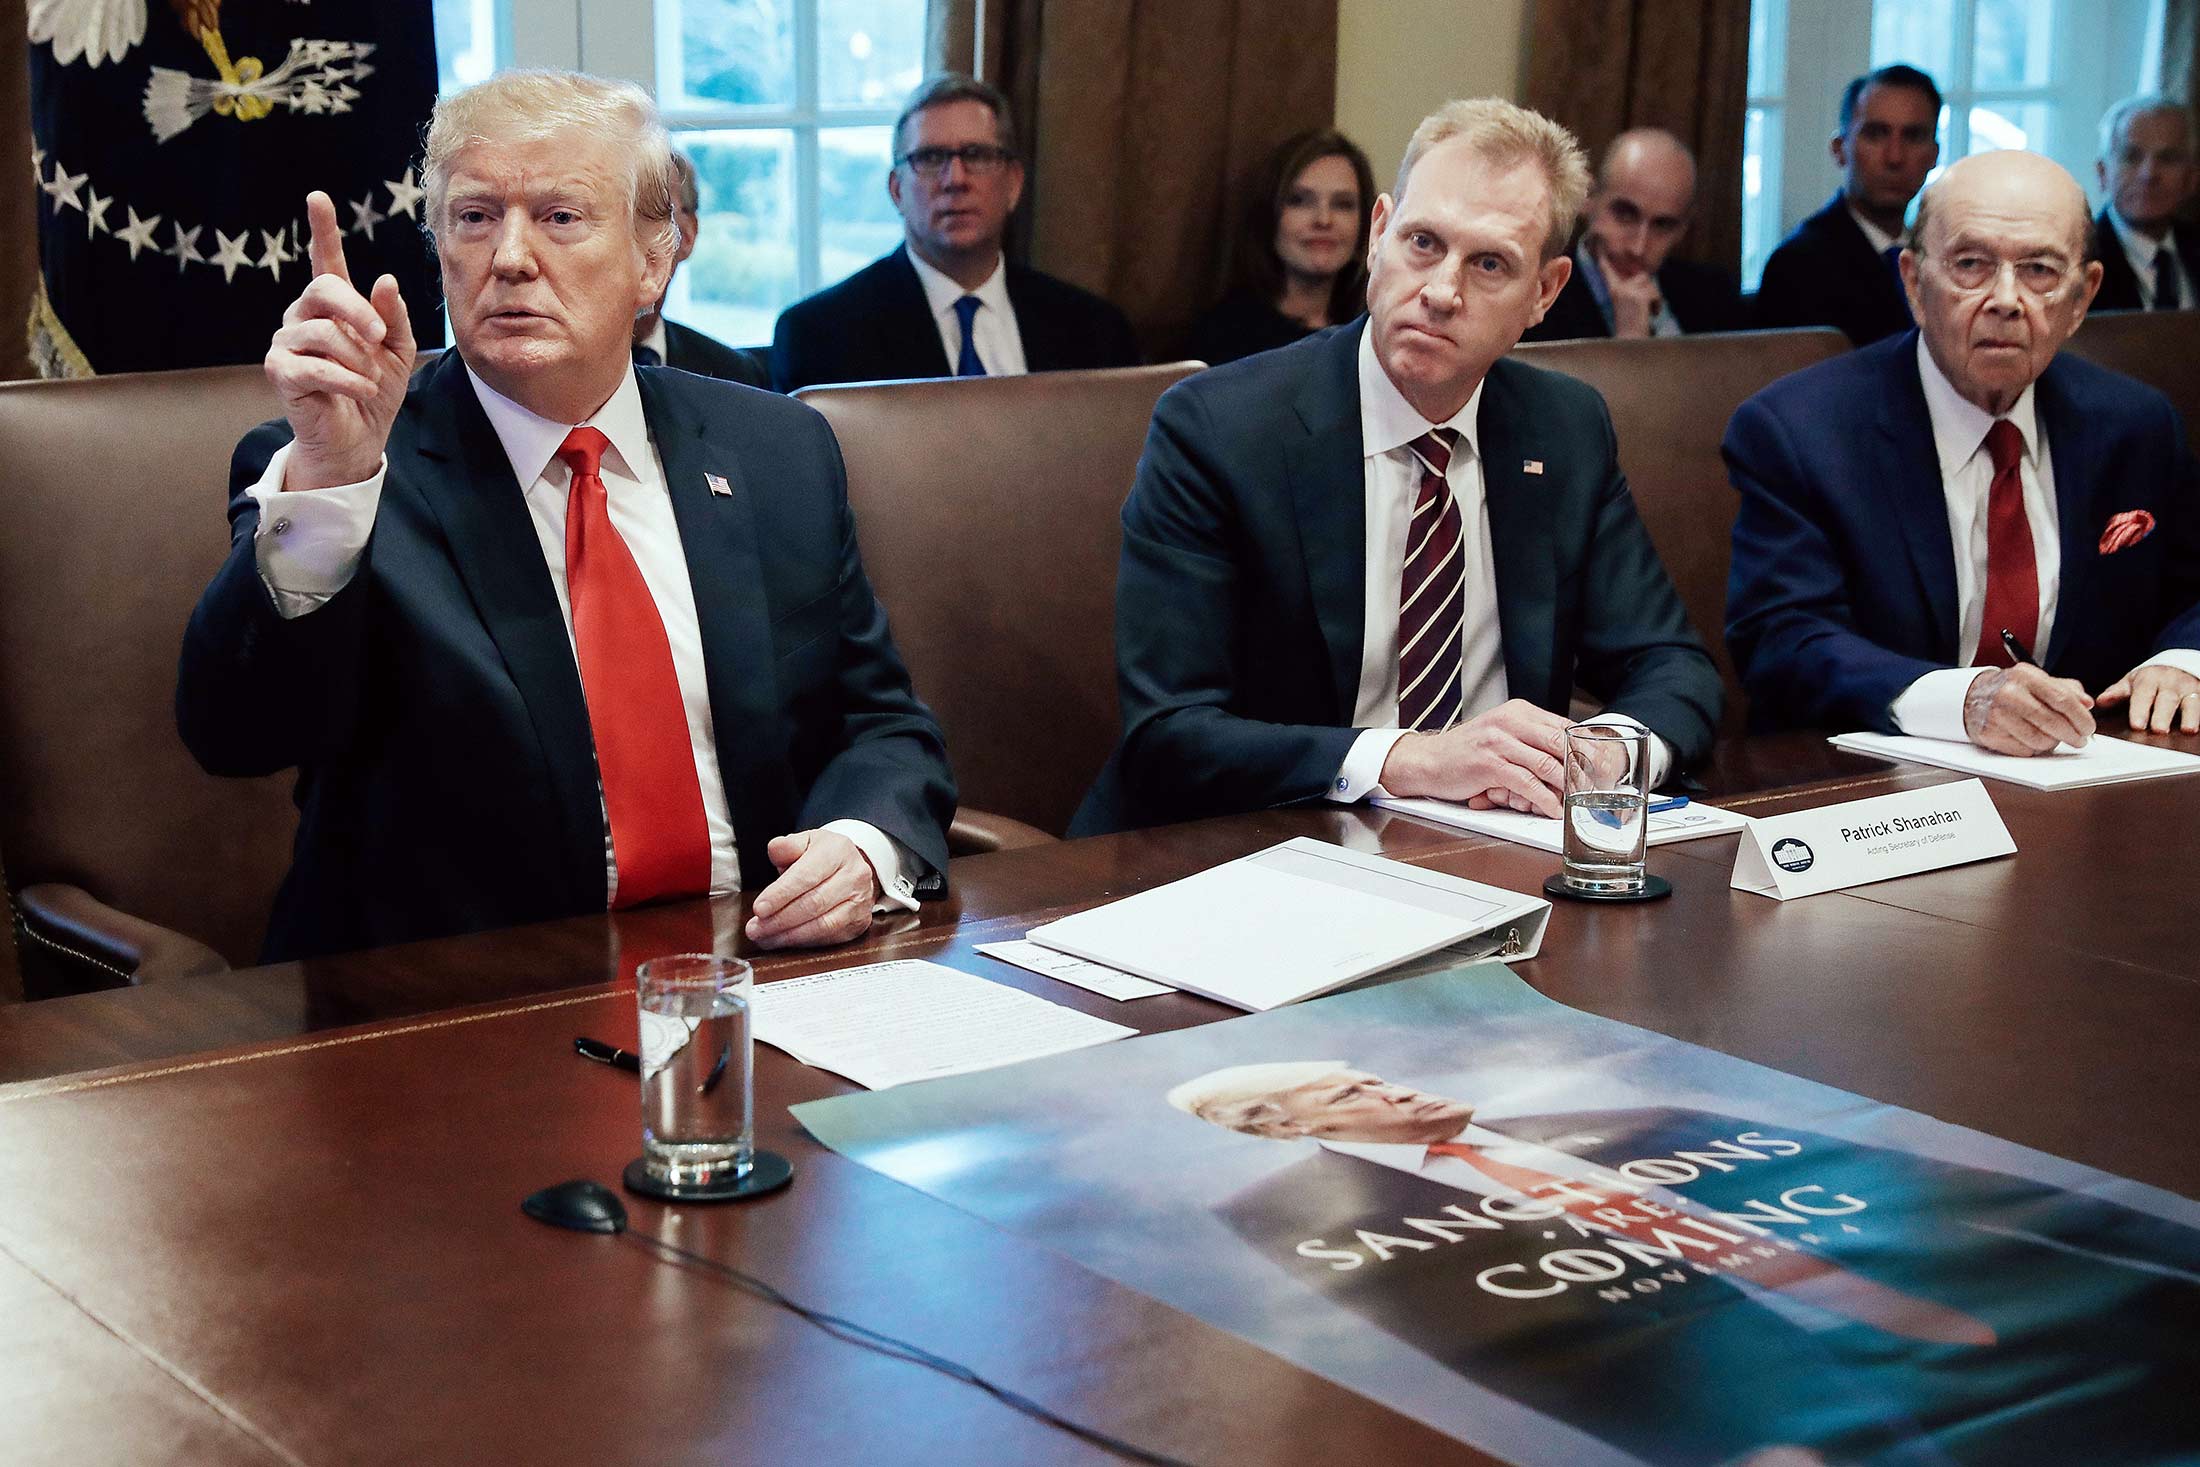 Donald Trump, Patrick Shanahan, and Wilbur Ross at a table in the White House.